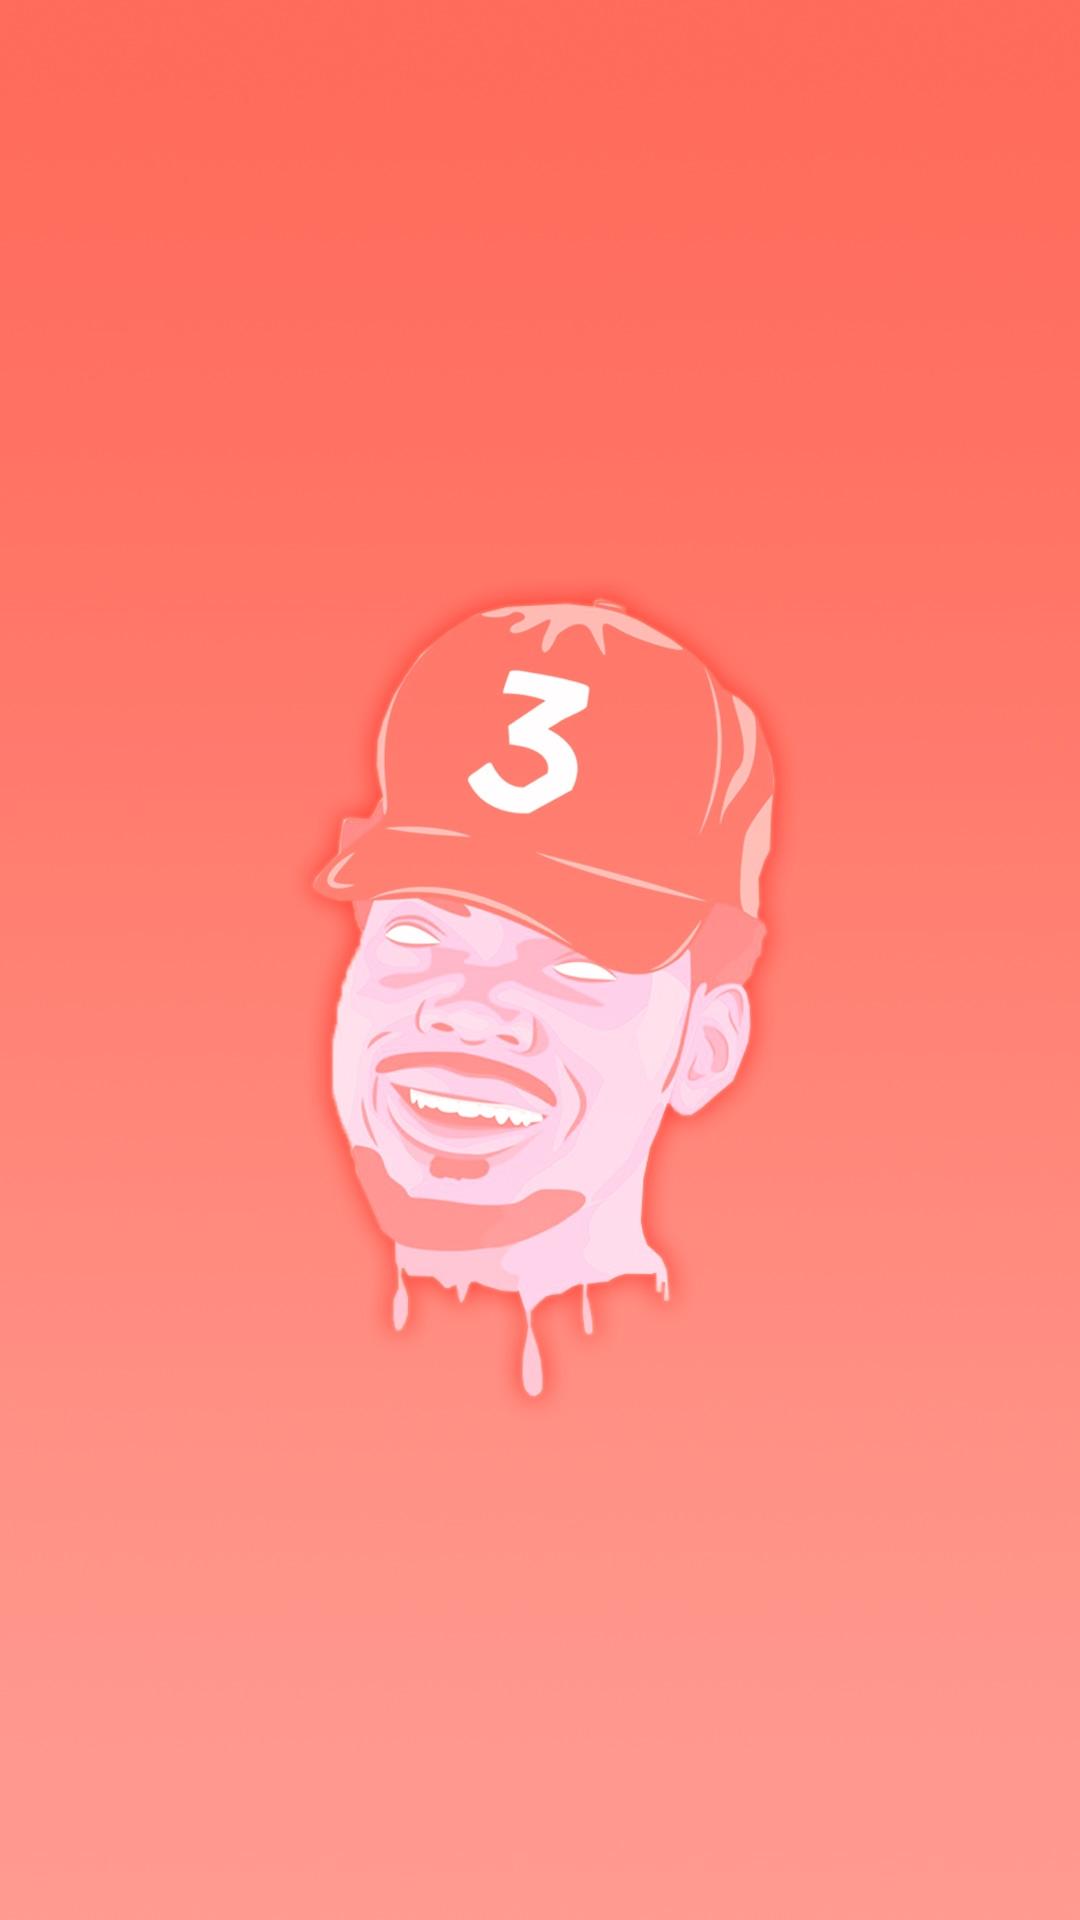 Chance IPhone Wallpaper. Made With Desogn By U ThatGuyWithCoolHair